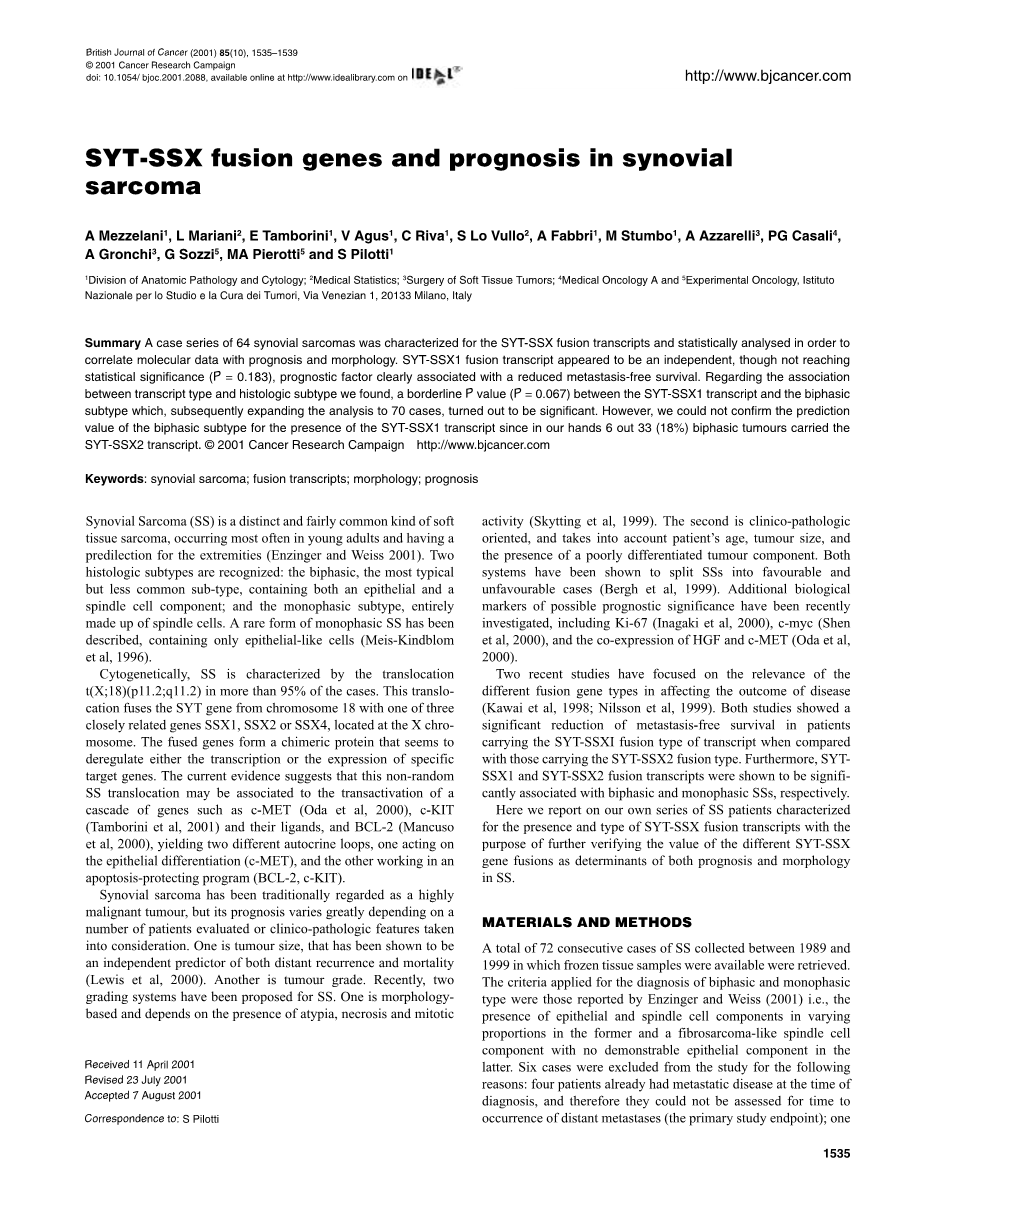 SYT-SSX Fusion Genes and Prognosis in Synovial Sarcoma